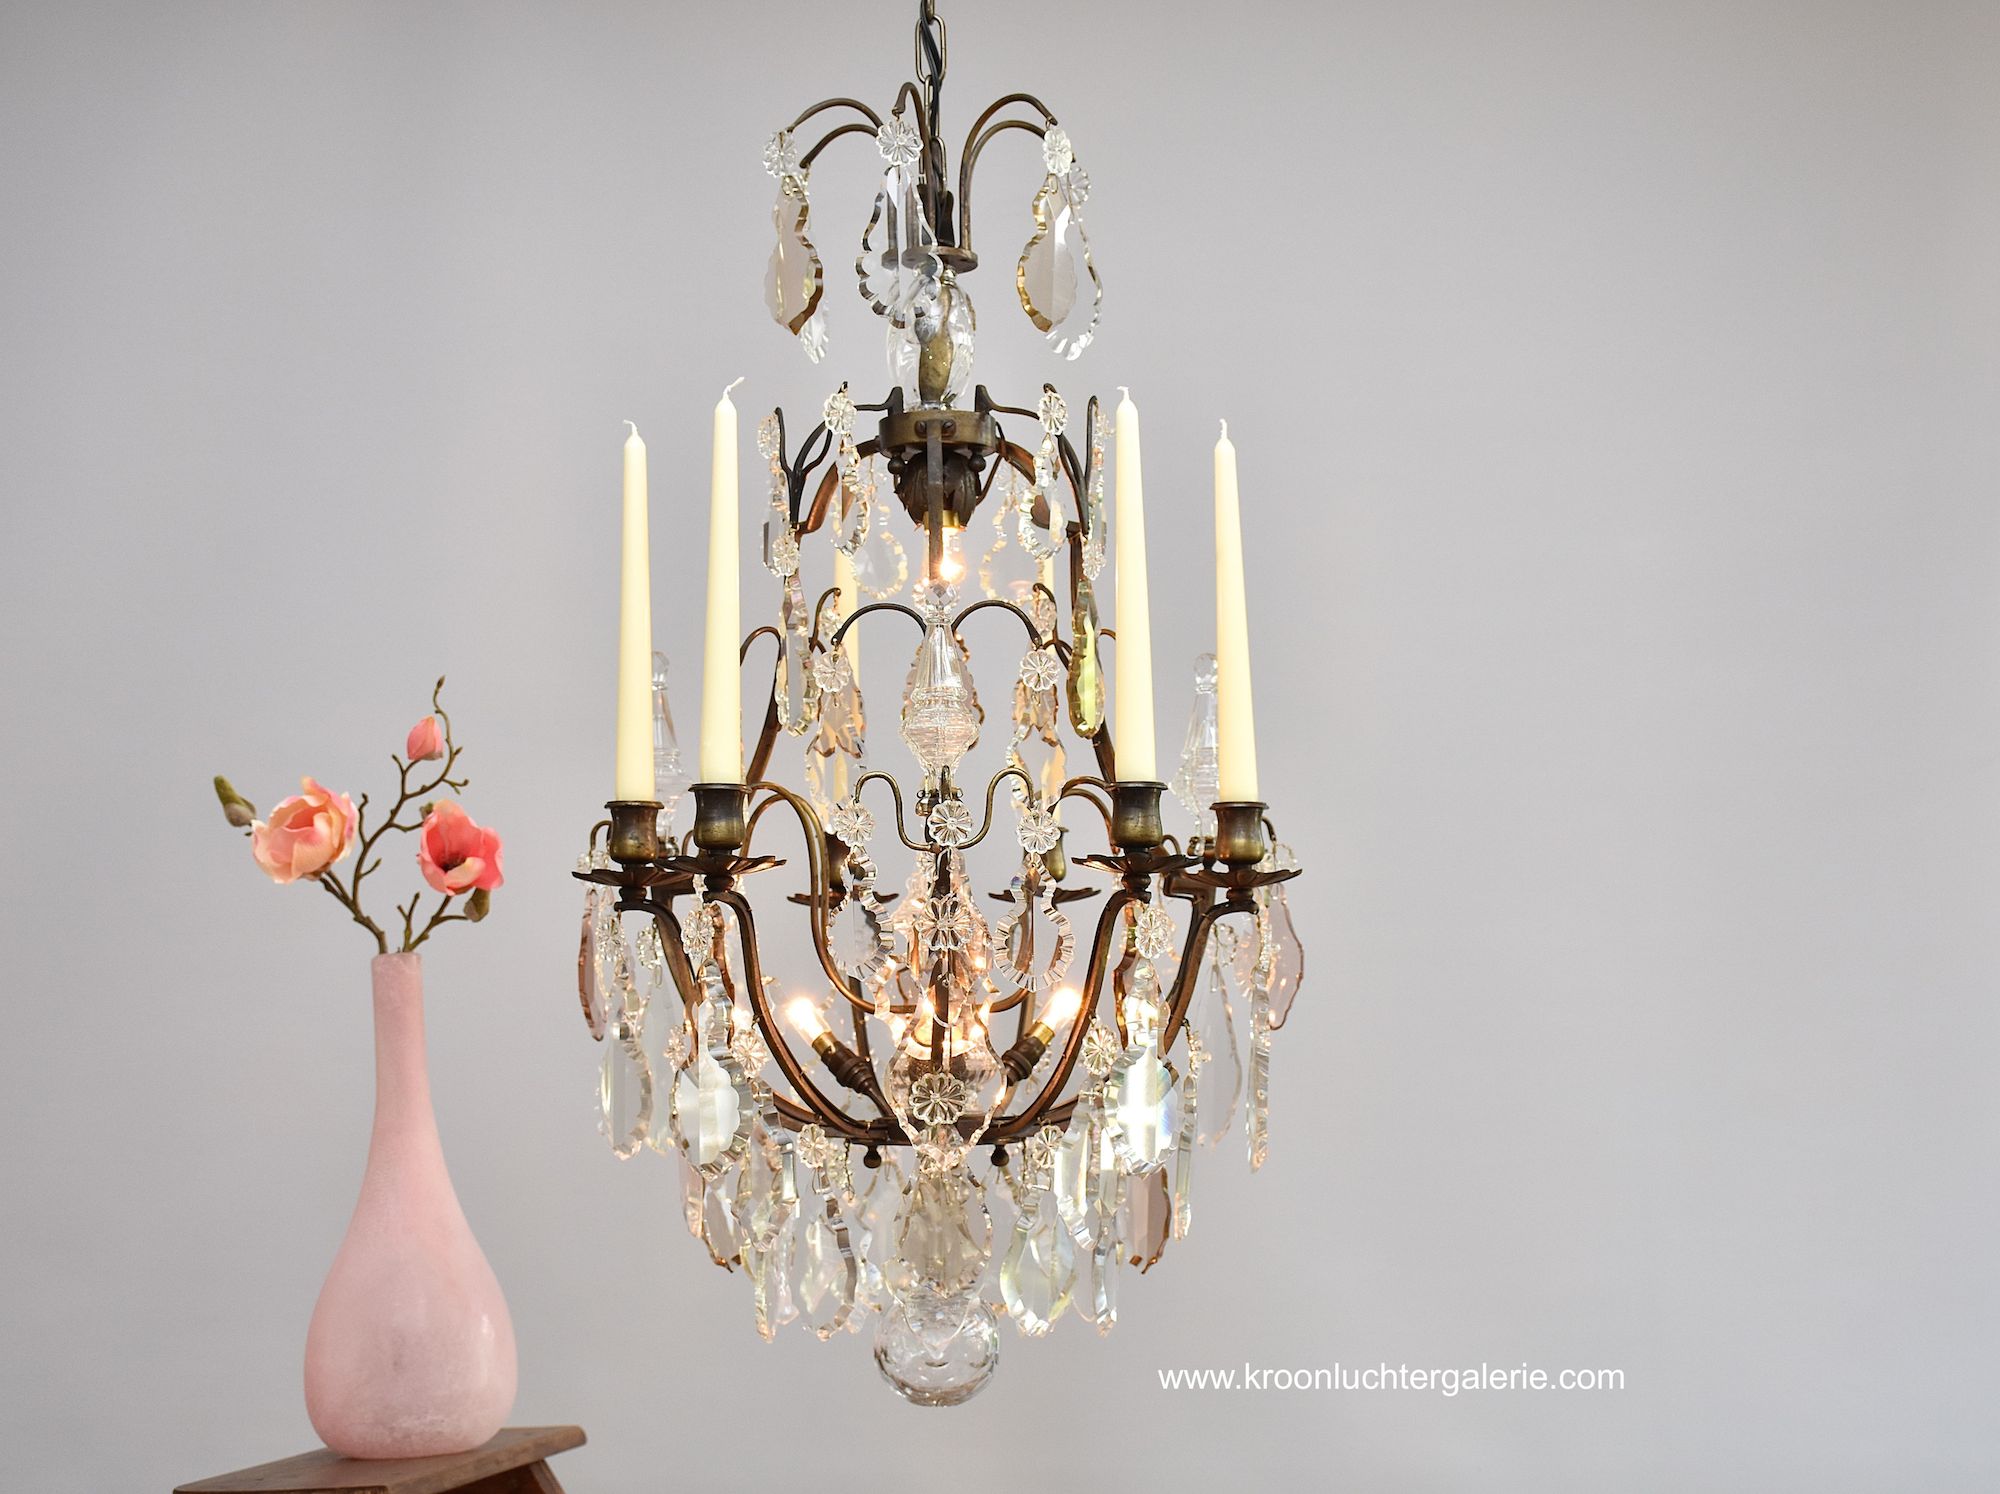 Antique French chandelier with candles and light fittings